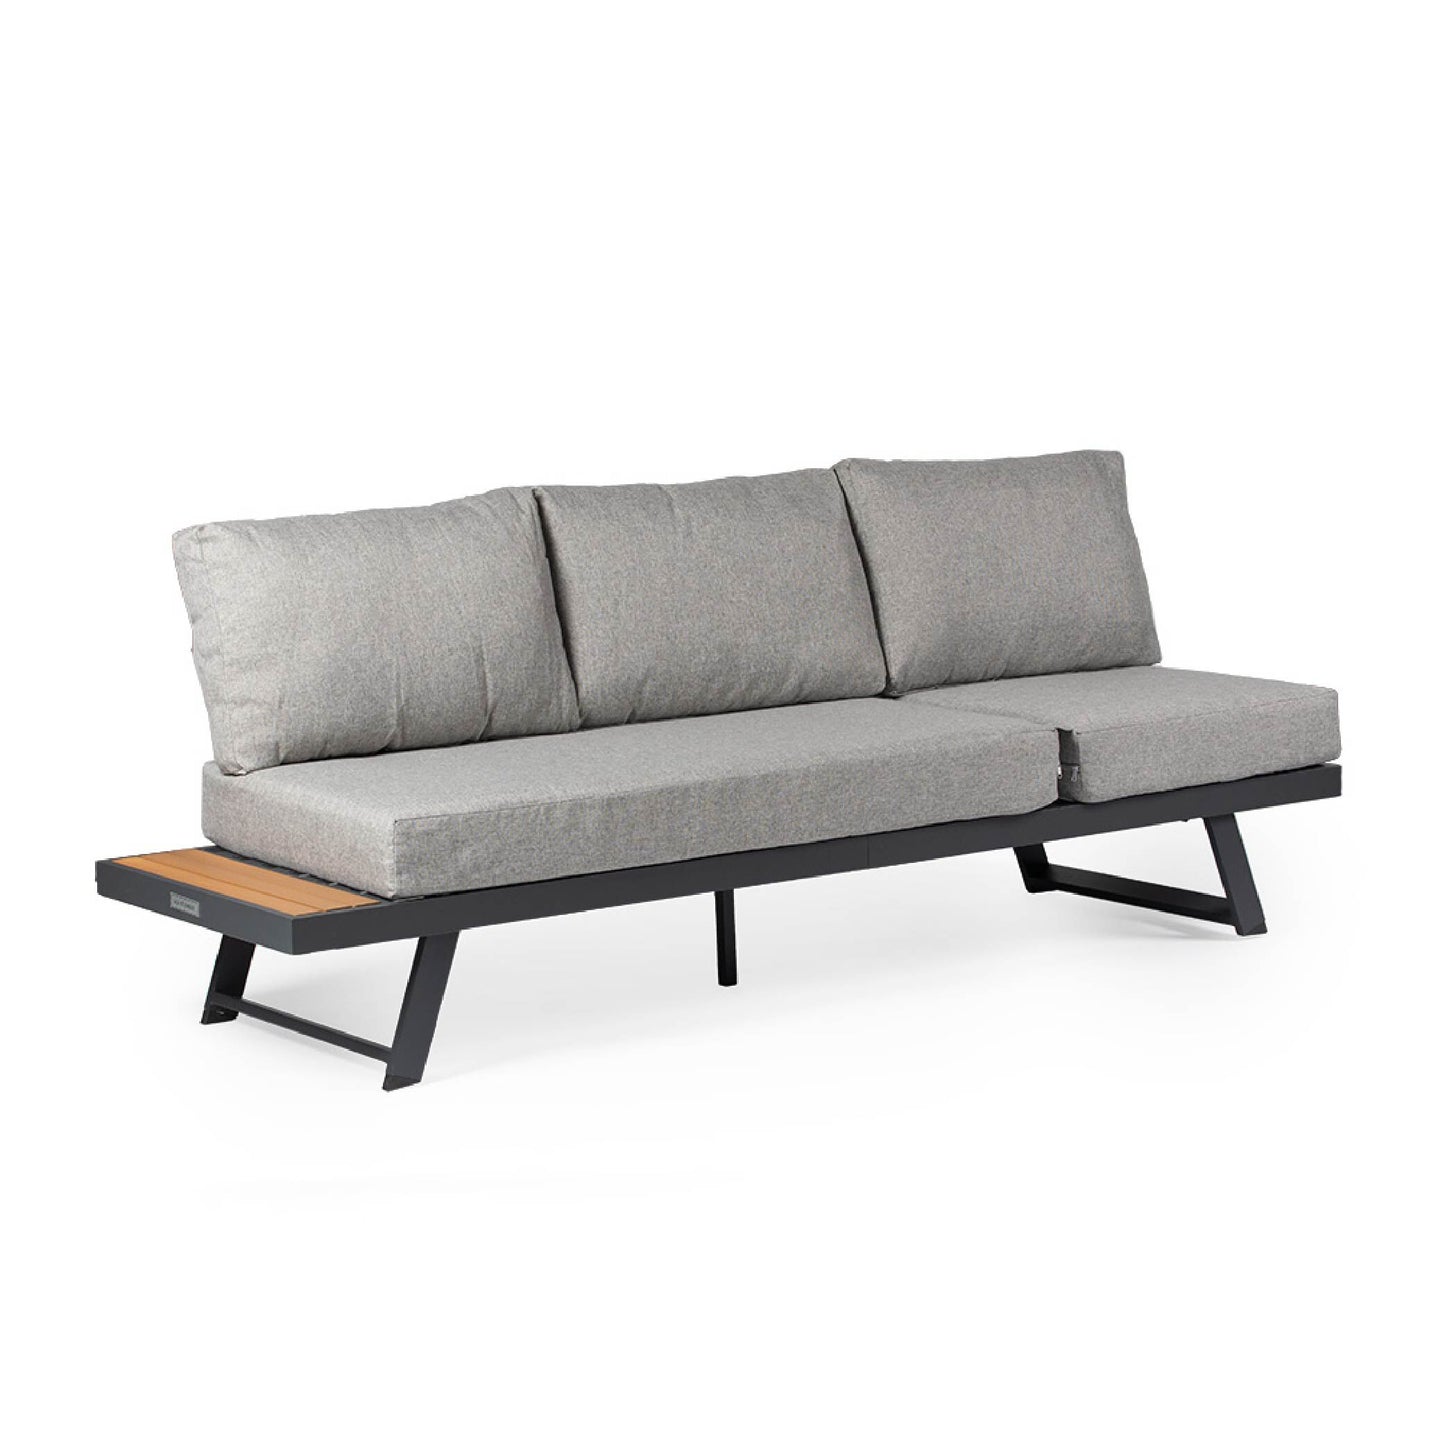 Caspian Sun Sofa with Cushions and Side Table - view 1